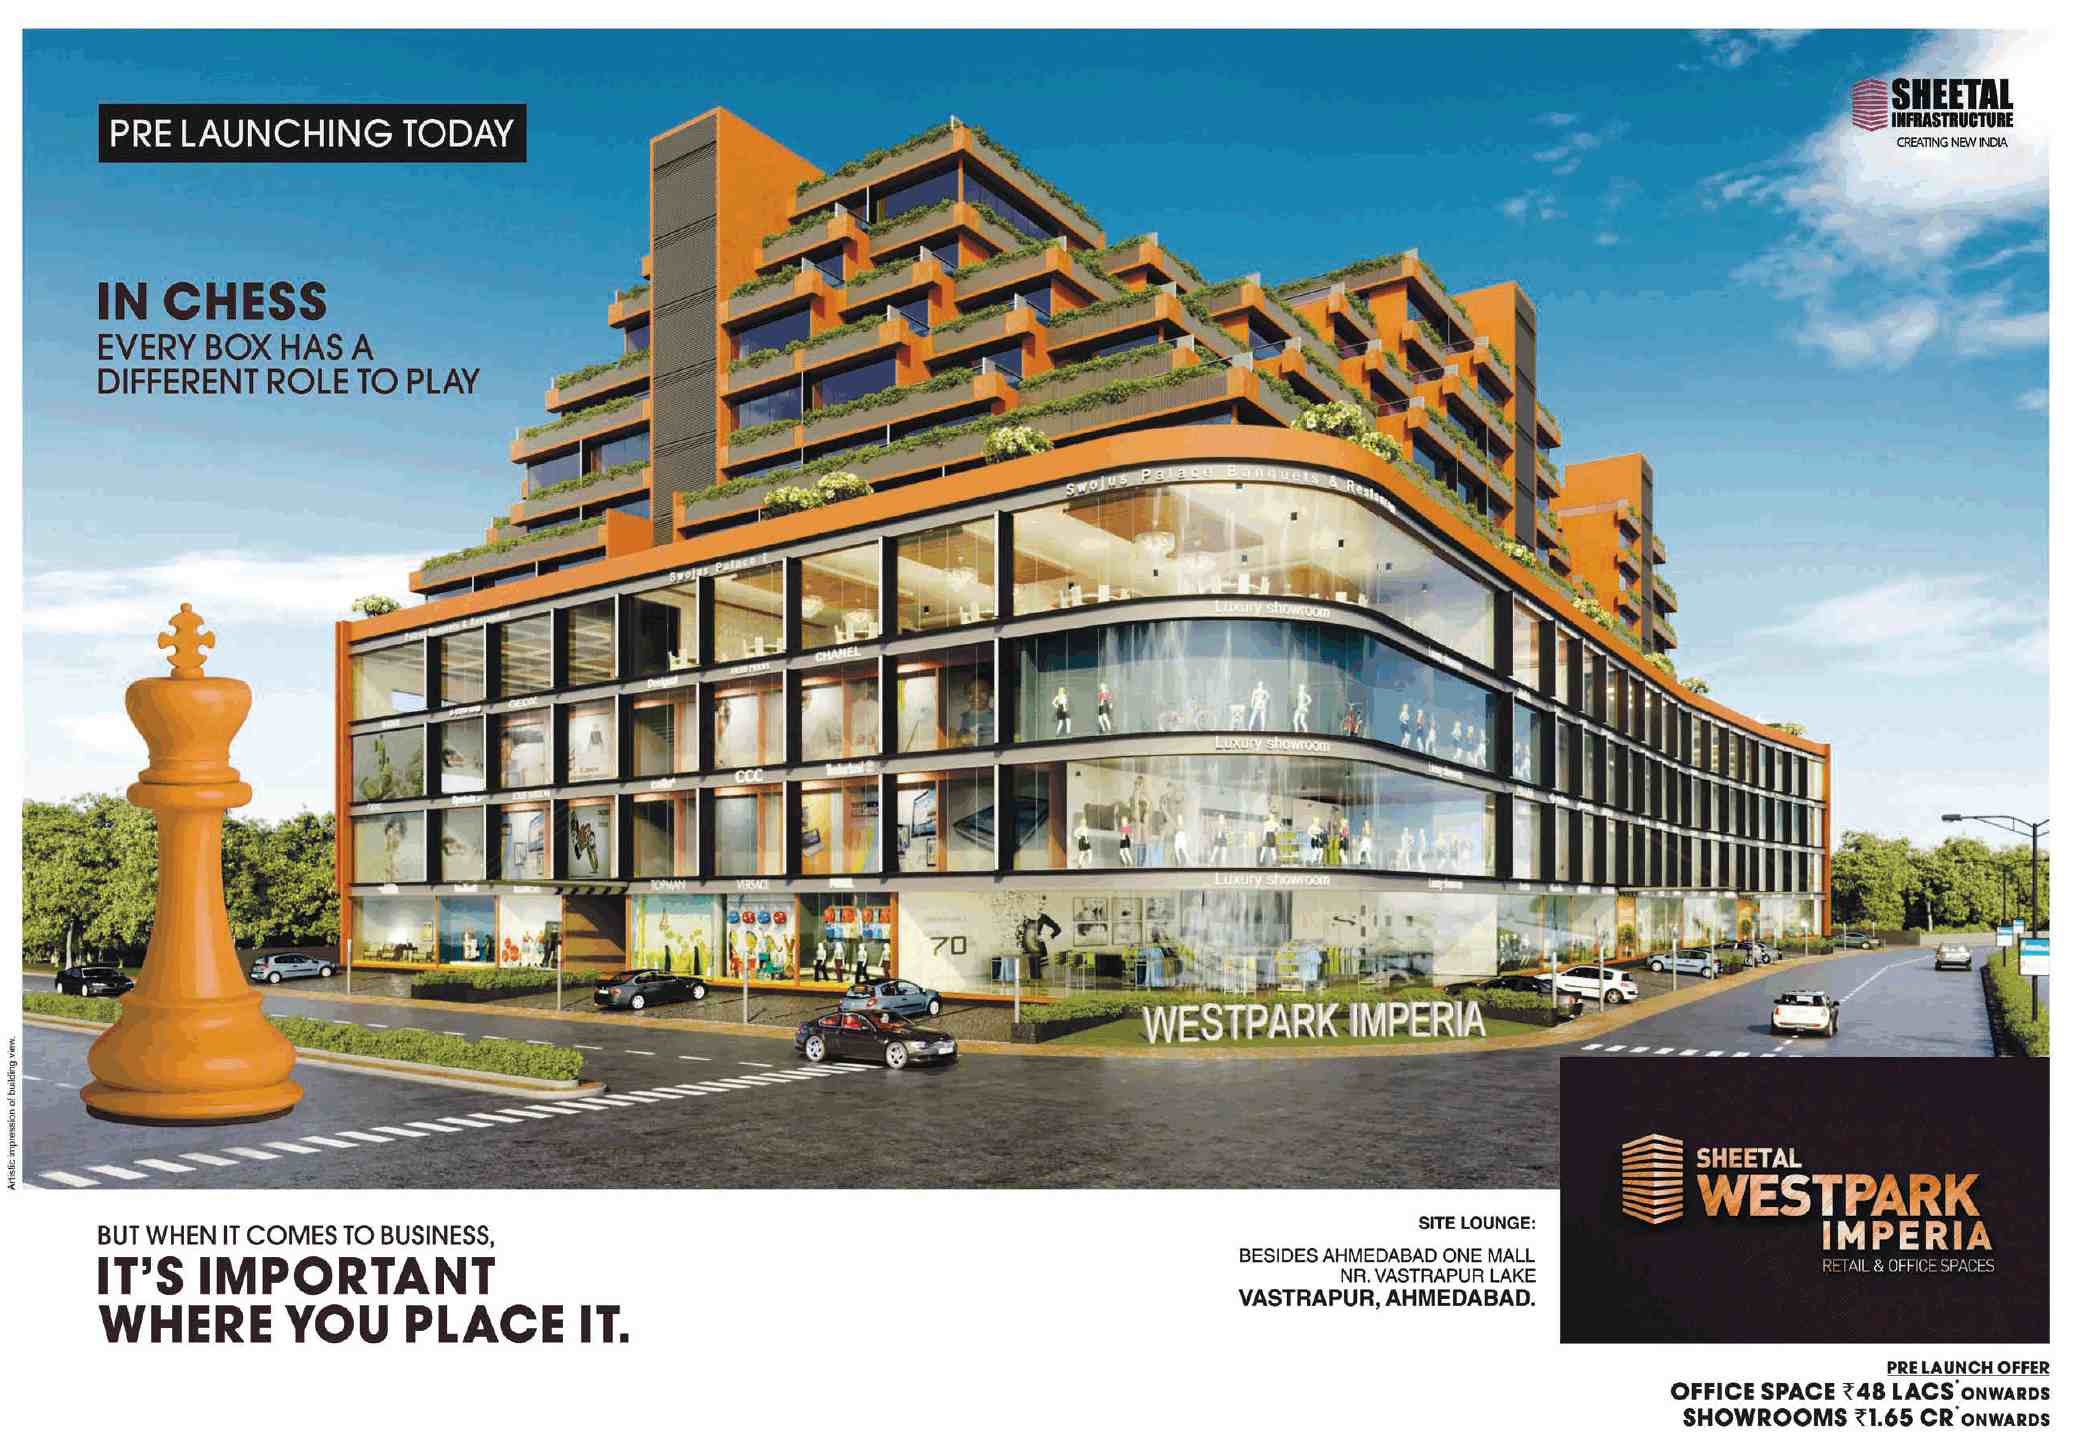 Avail the Pre-Launch offer at Sheetal Westpark Imperia in Ahmedabad